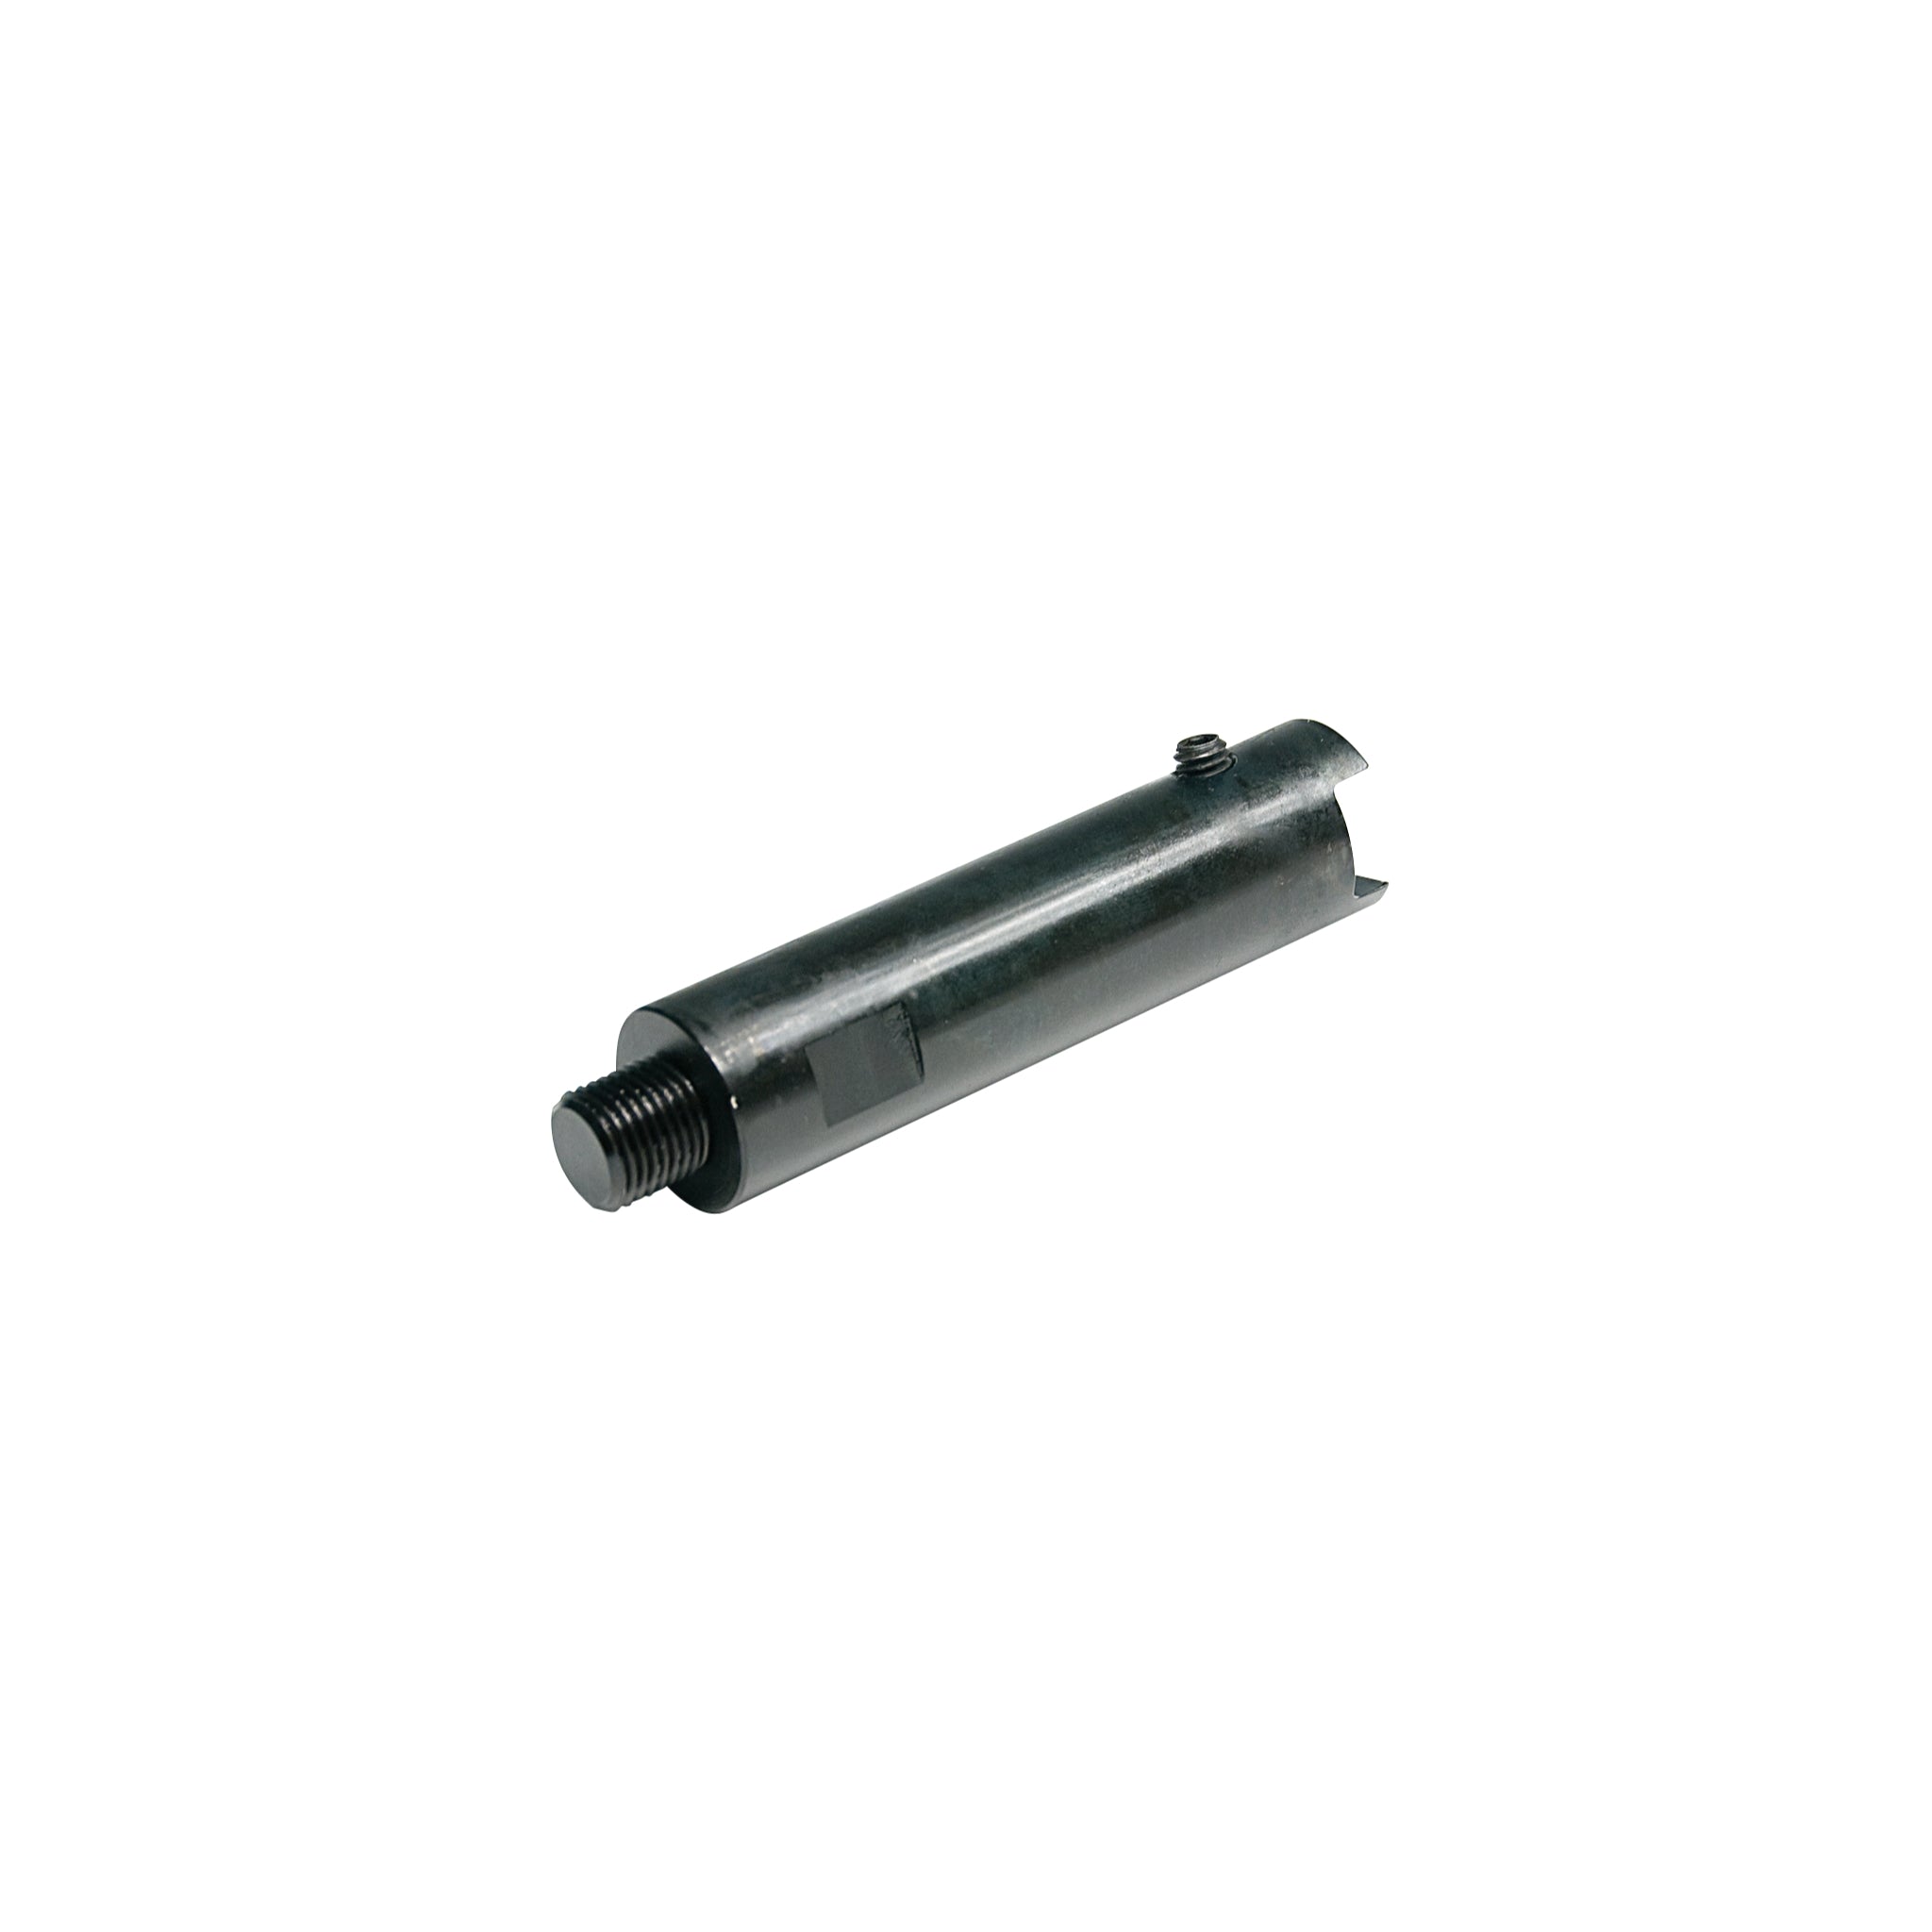 Chuck to Spindle Adapters for Hougen Mag Drills - 40341 - CelticMagDrills.ca